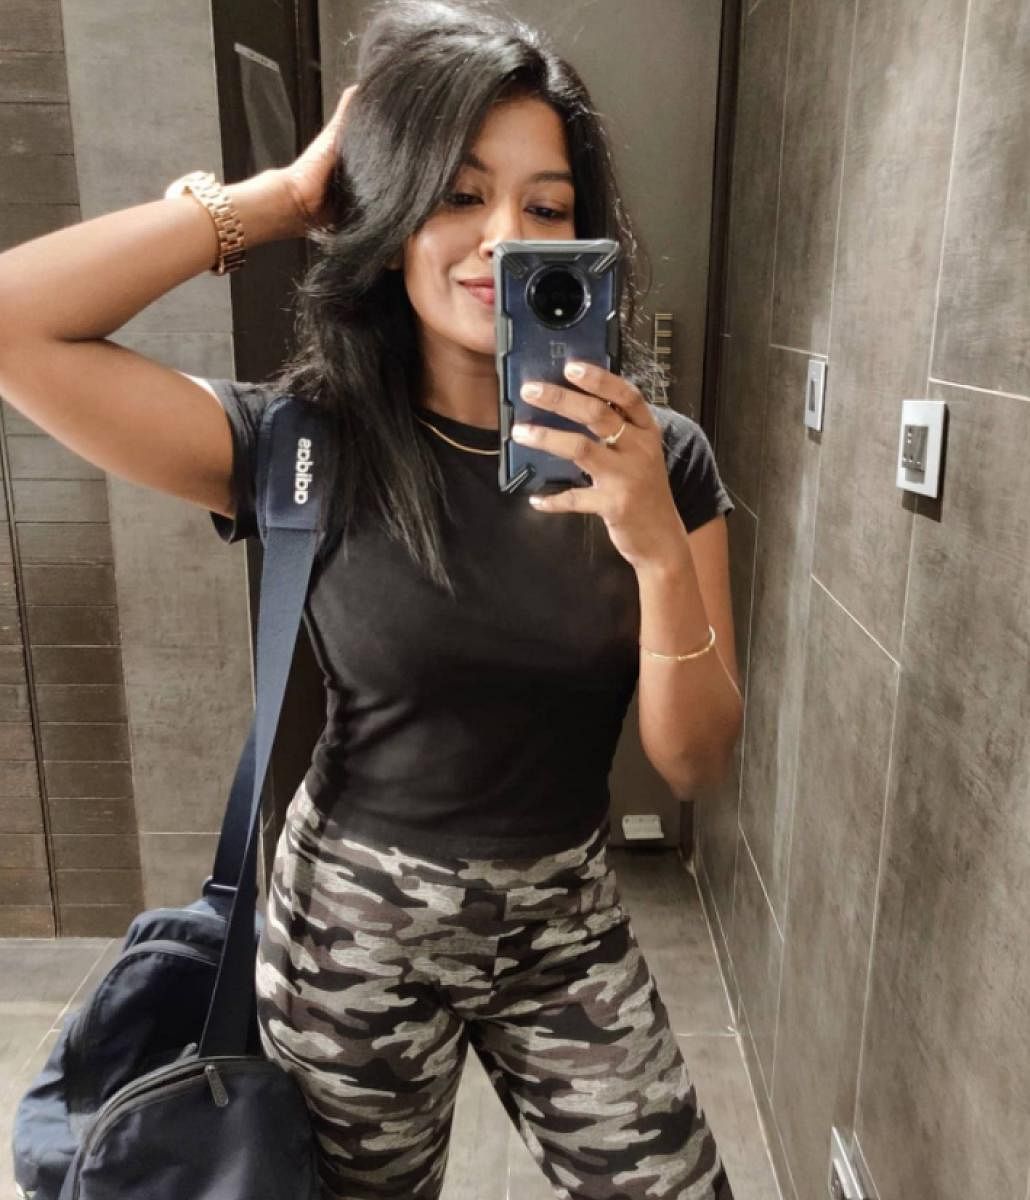 A capsule closet consists of good quality basics that can be made versatile by mixing and matching to suit your needs. (Above) Karthika Anand wore the same black crop top to the gym and on a day out.